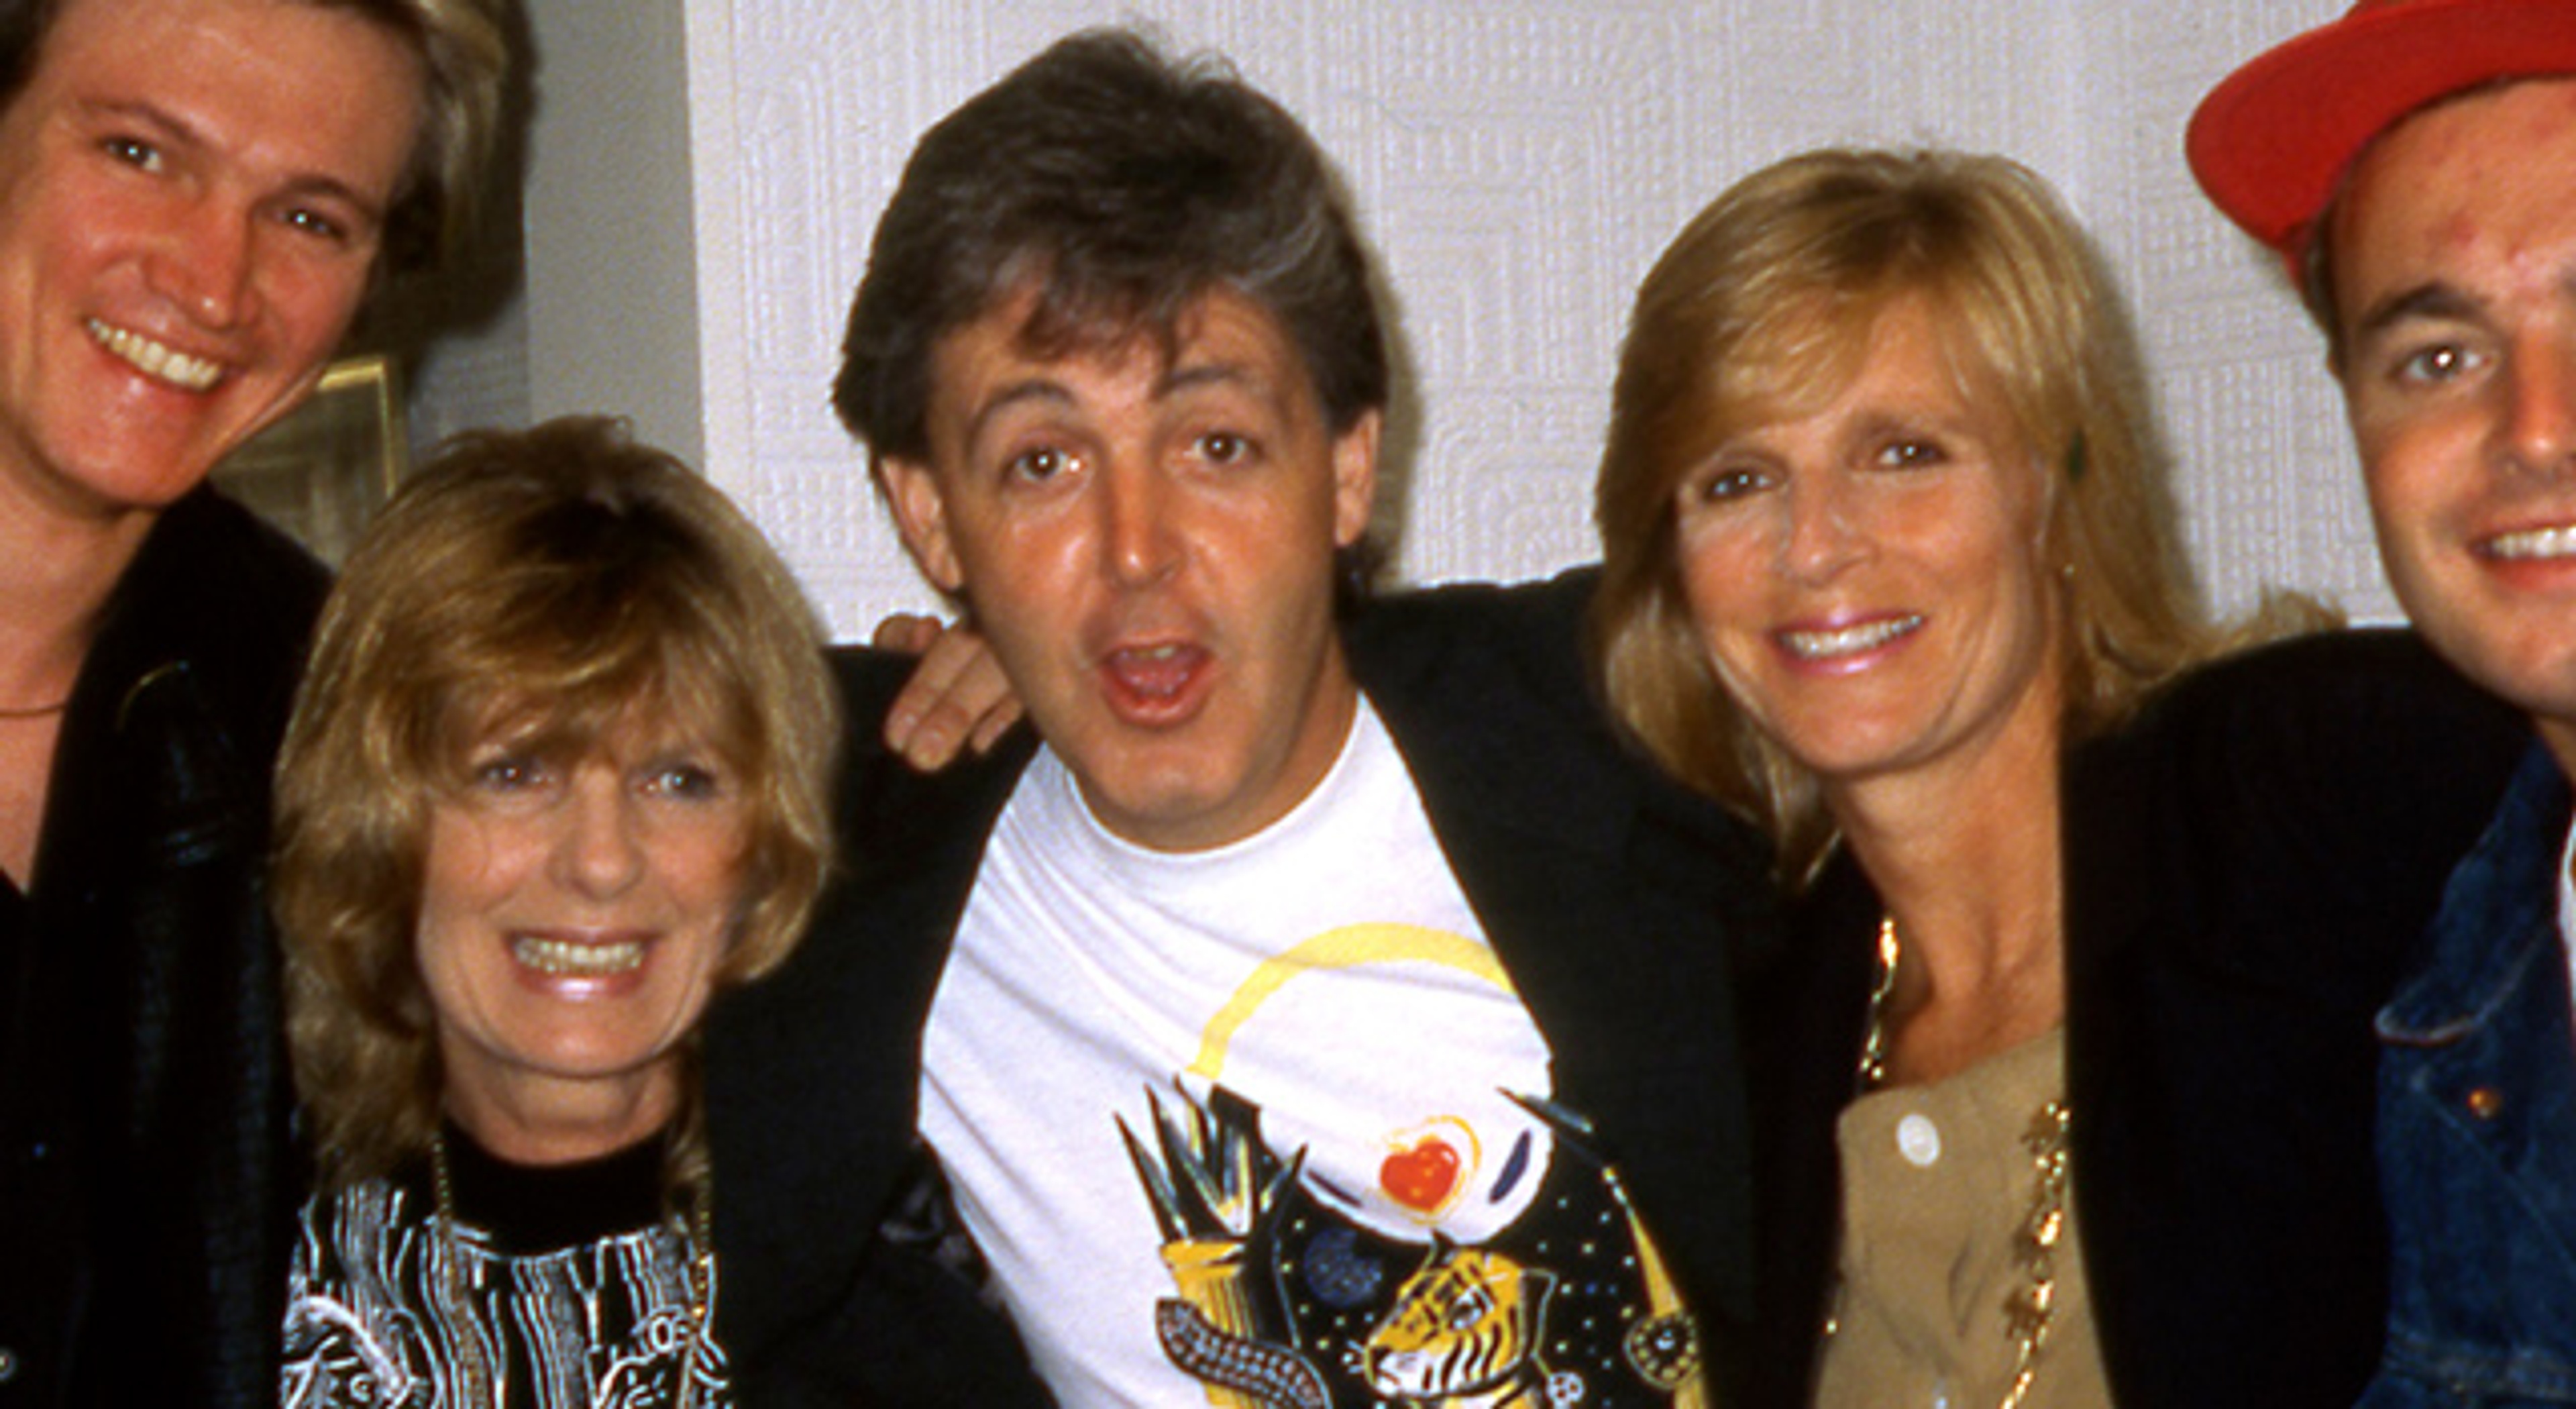 Paul Pays Tribute To Carla Lane